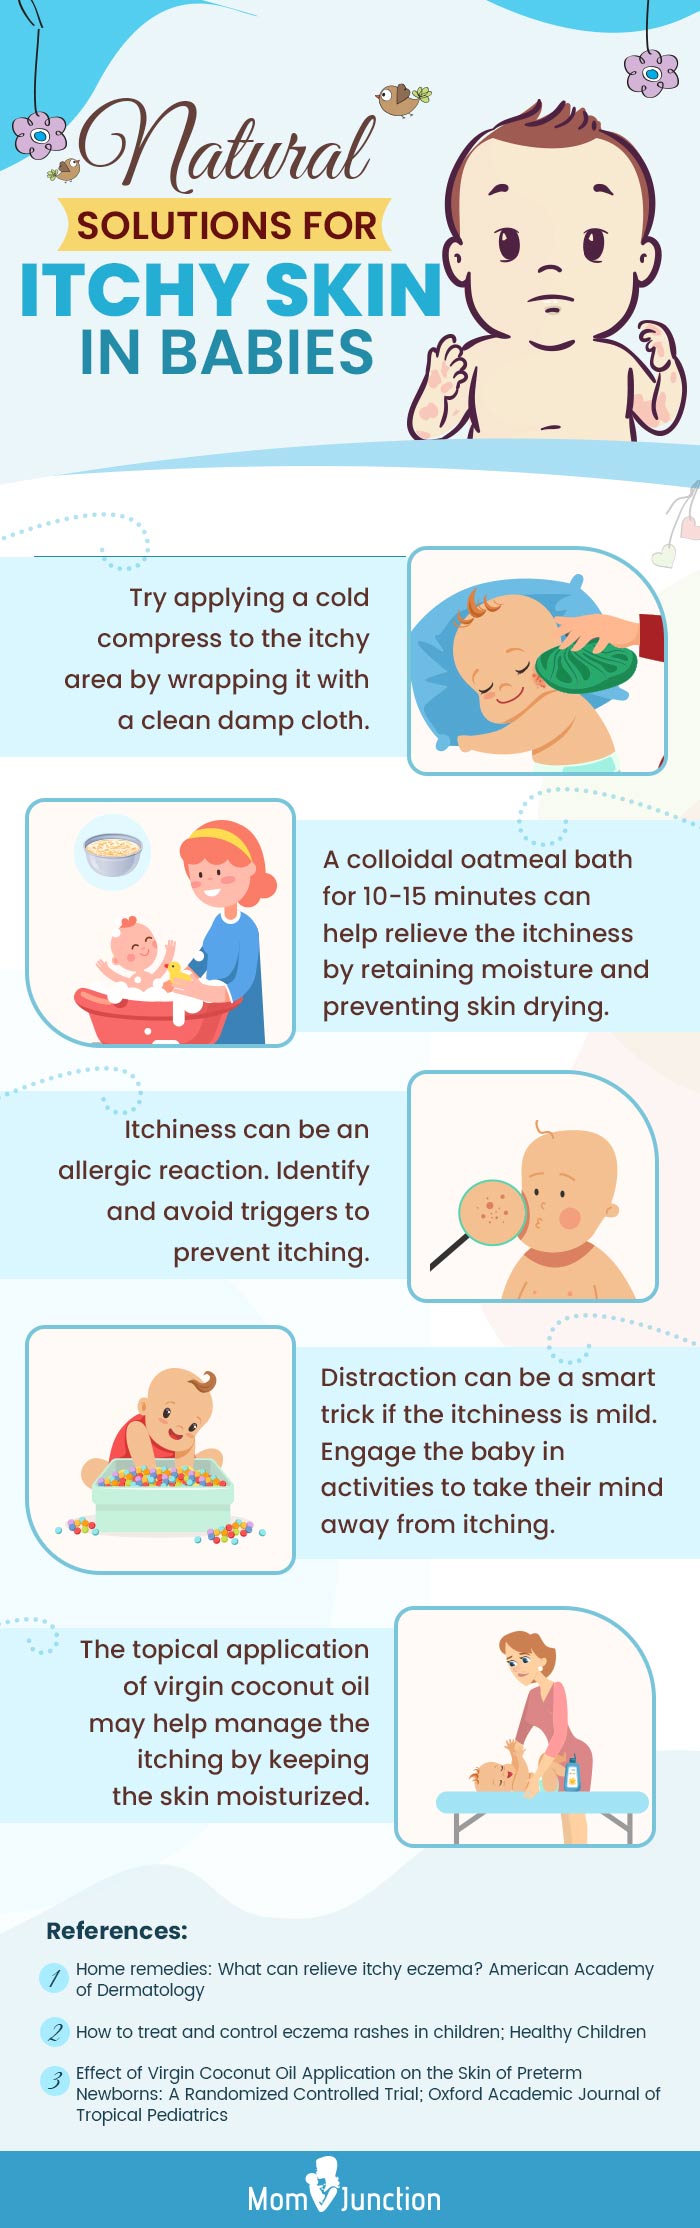 natural solutions for itchy skin in babies (infographic)